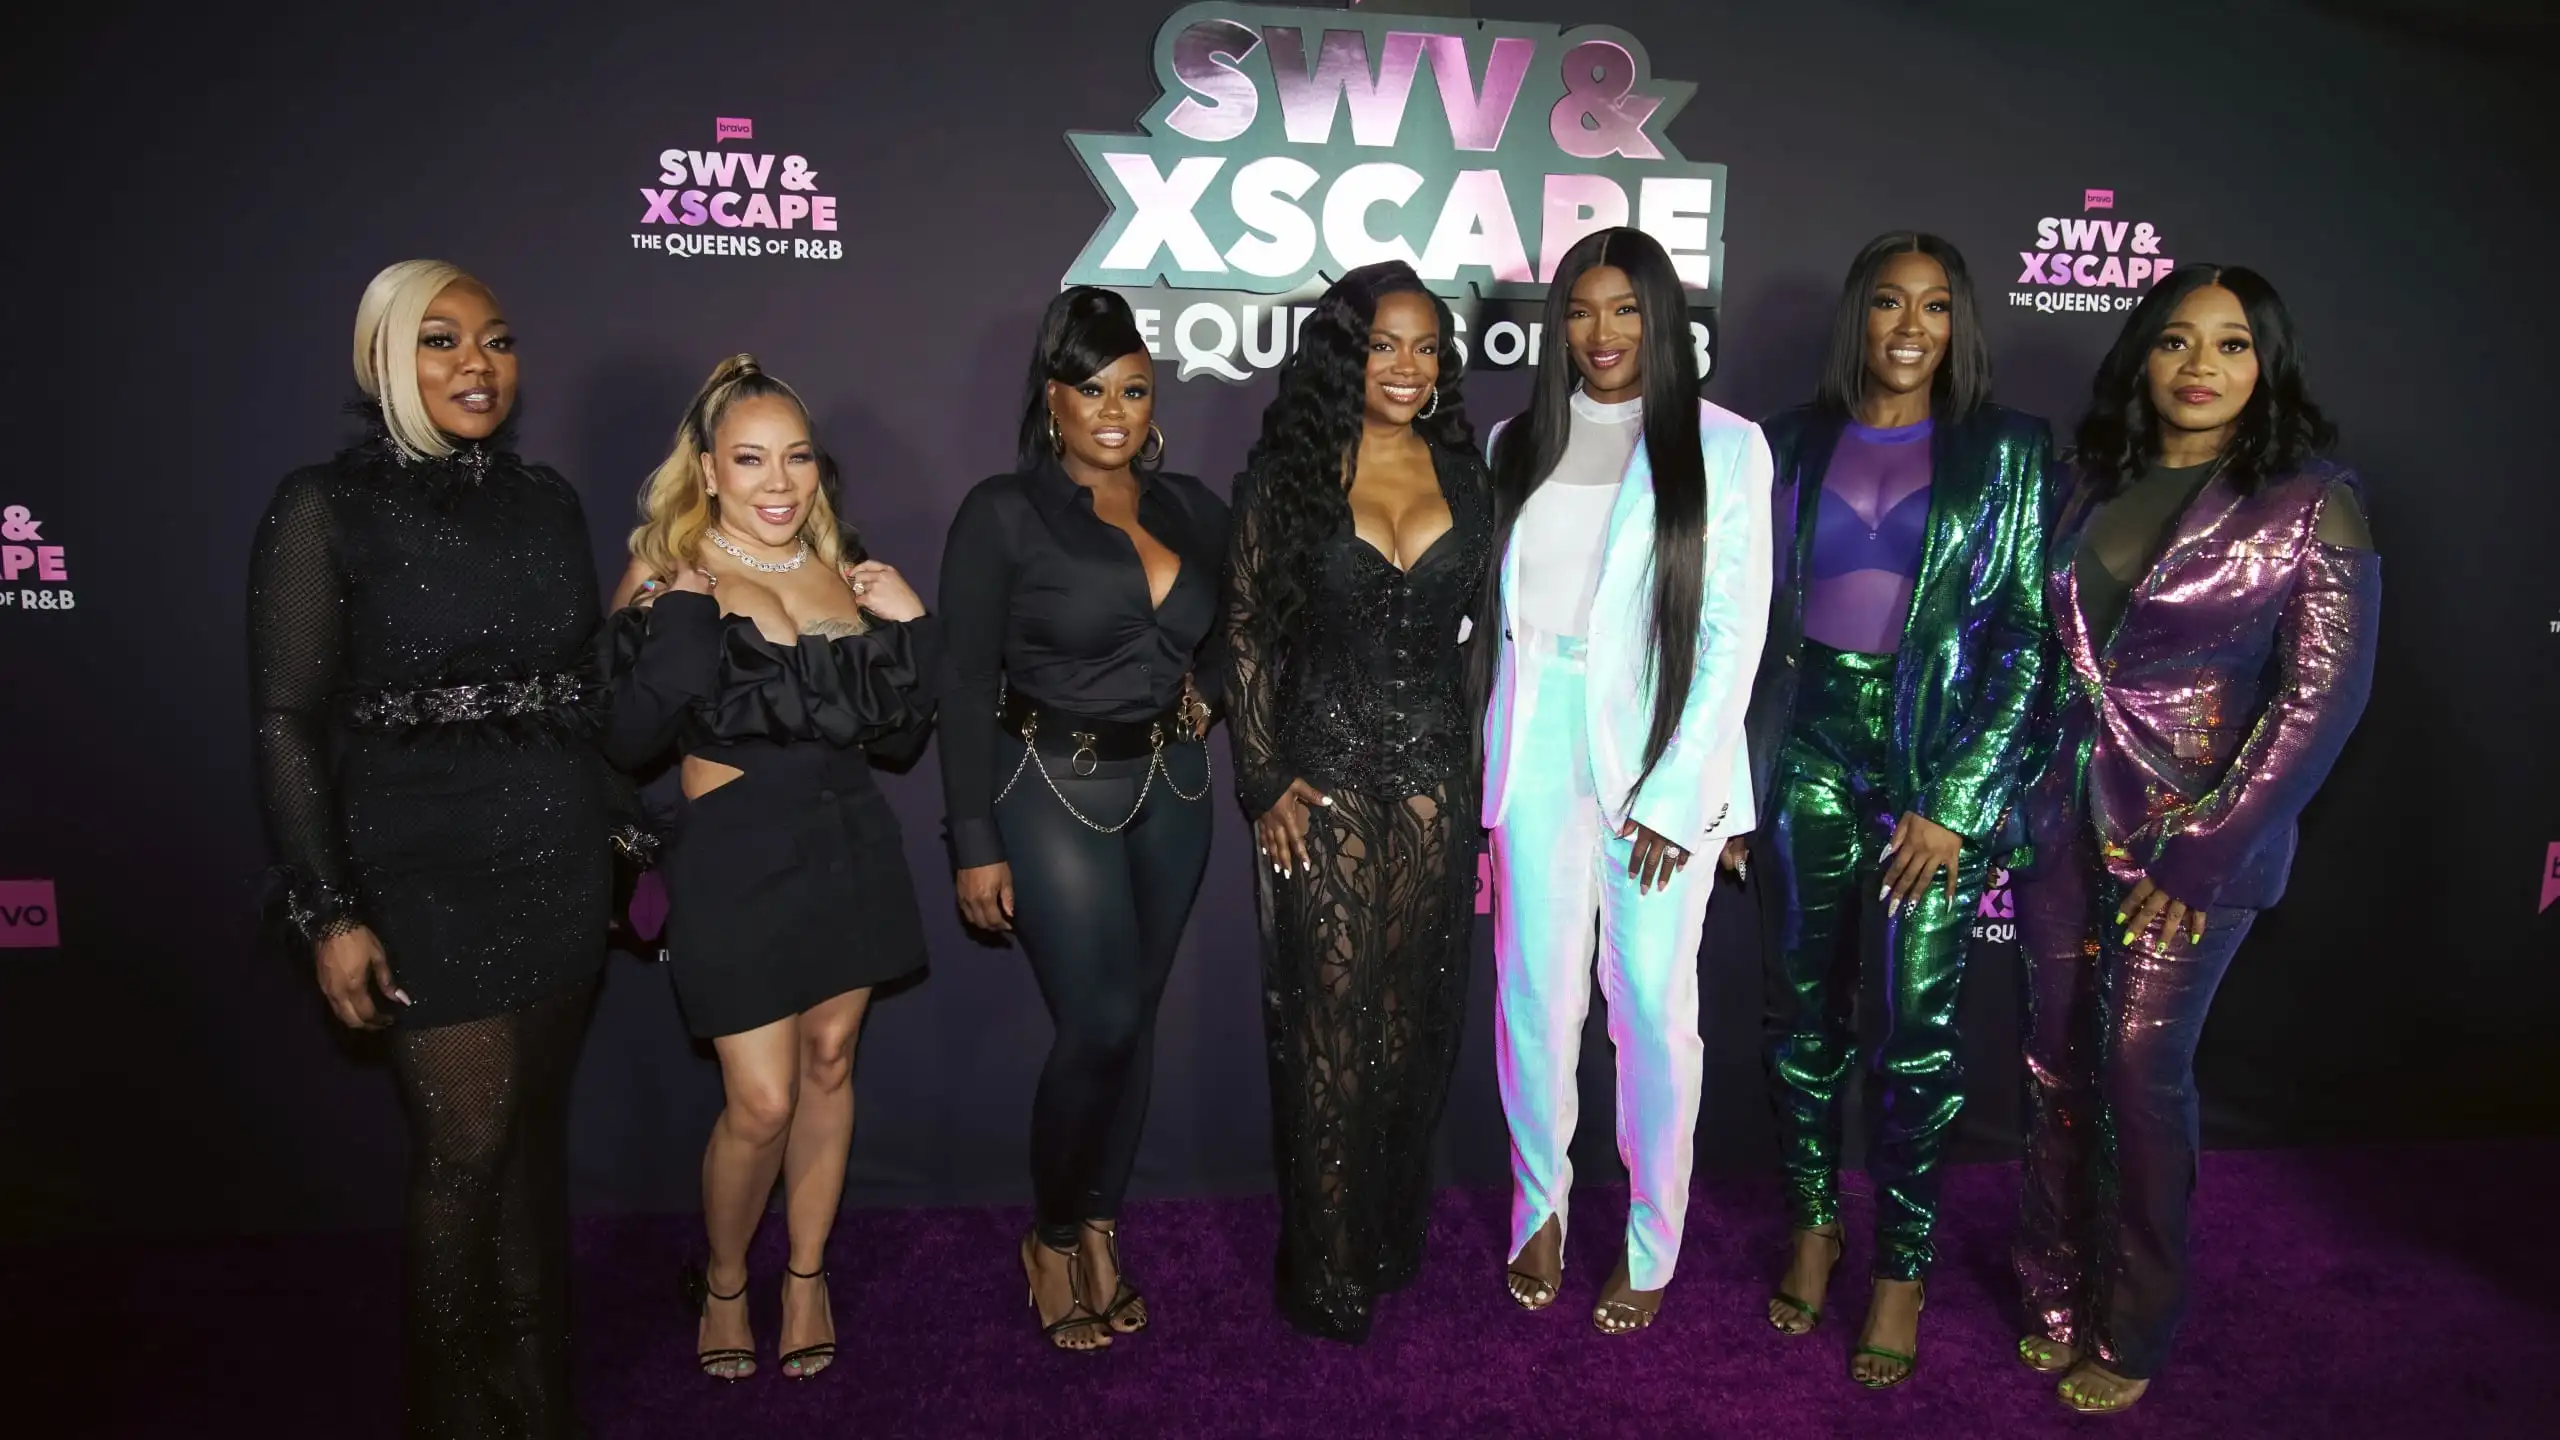 A few reasons you should go on ahead and watch ‘SWV & Xscape The